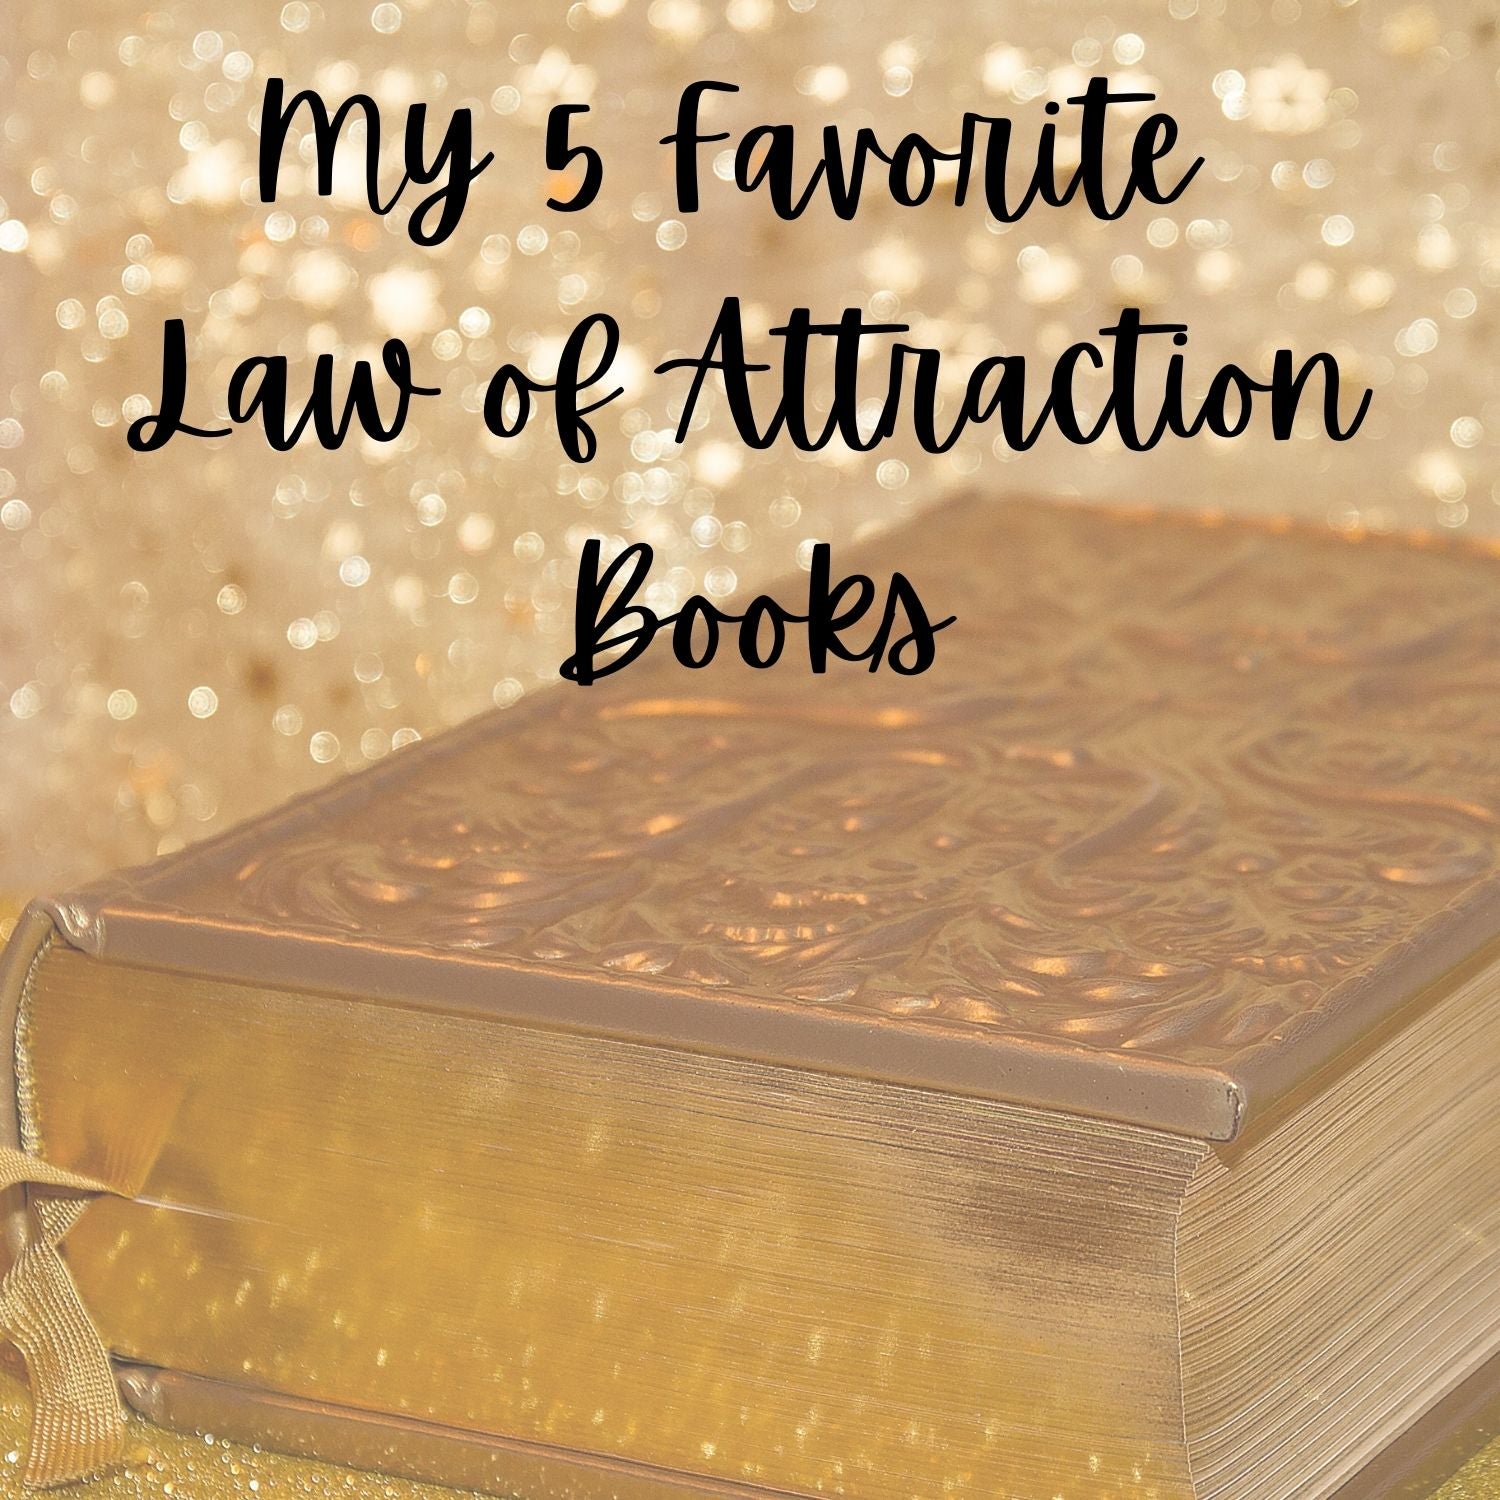 My 5 Favorite Law of Attraction Books